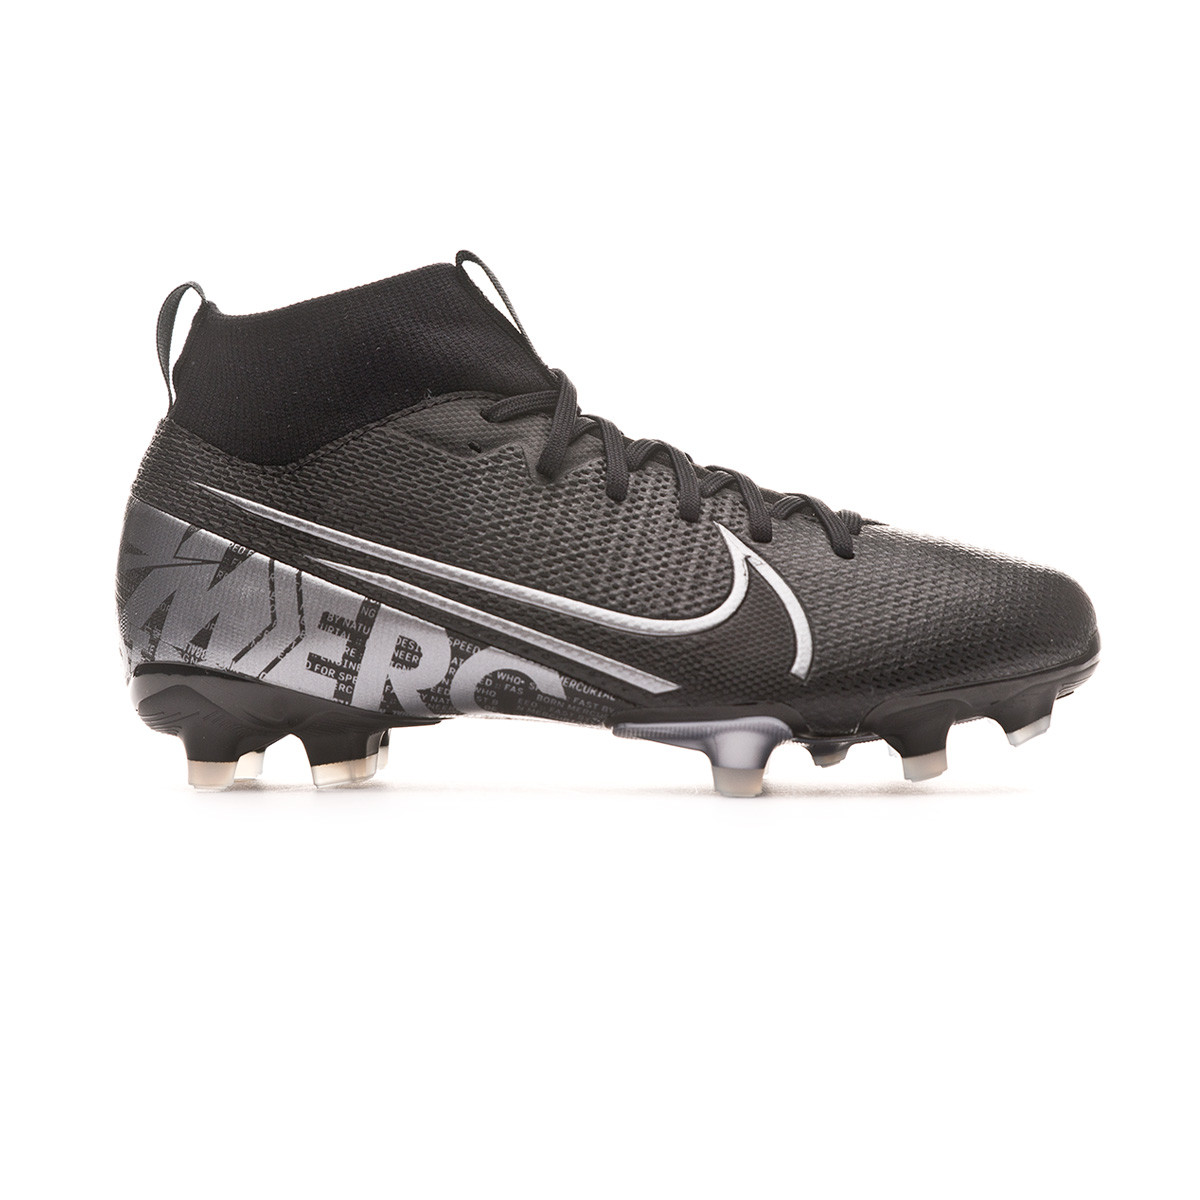 Nike Mercurial Superfly 7 Academy MG Jr. from 41.95.